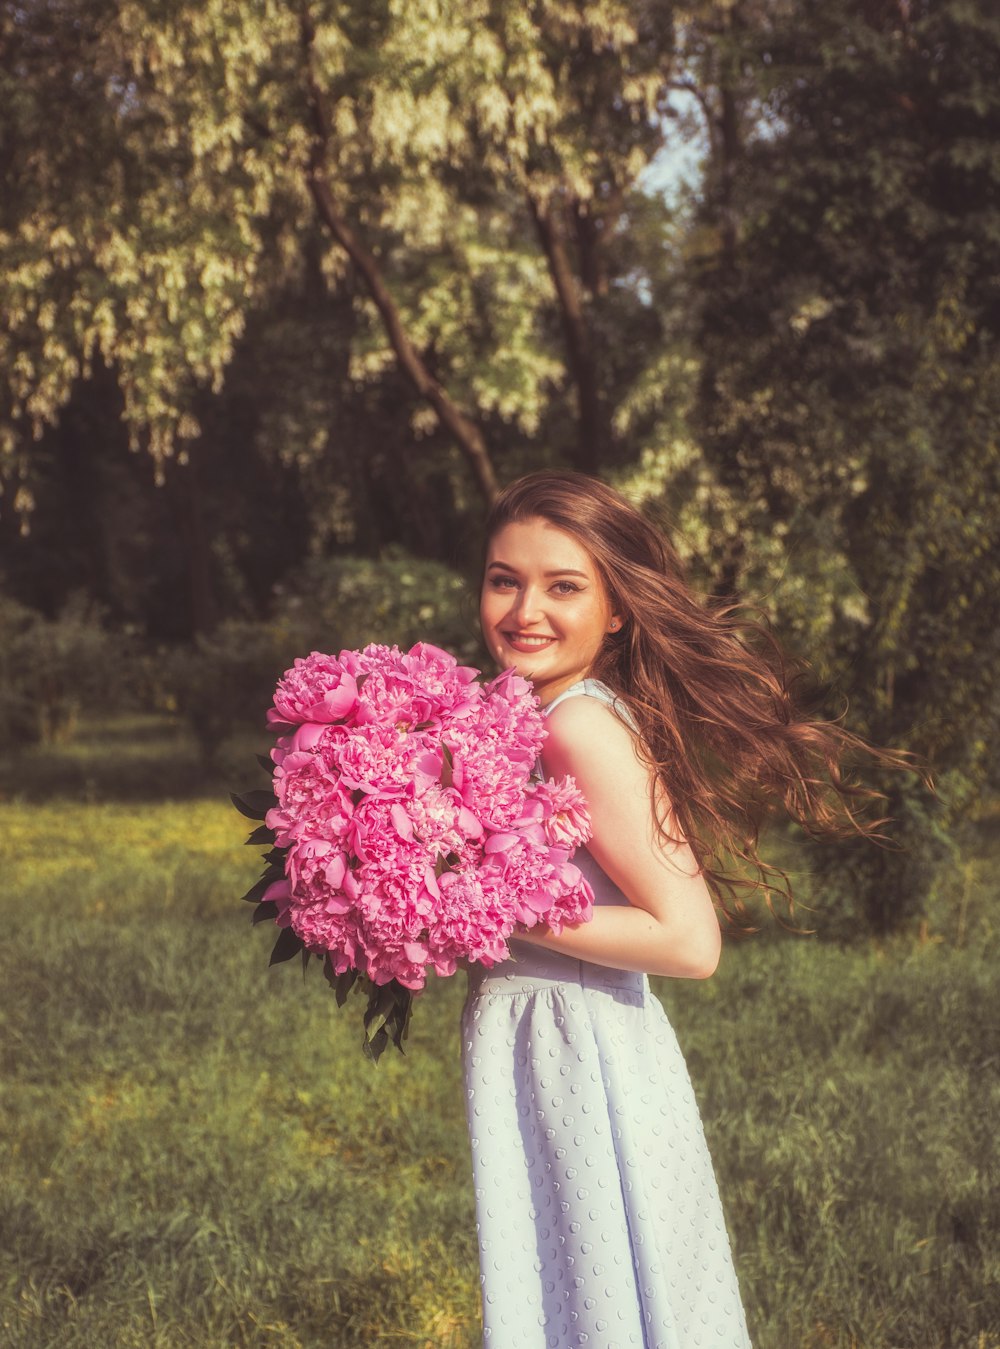 woman holding bouquet of pink flower smiling during daytime